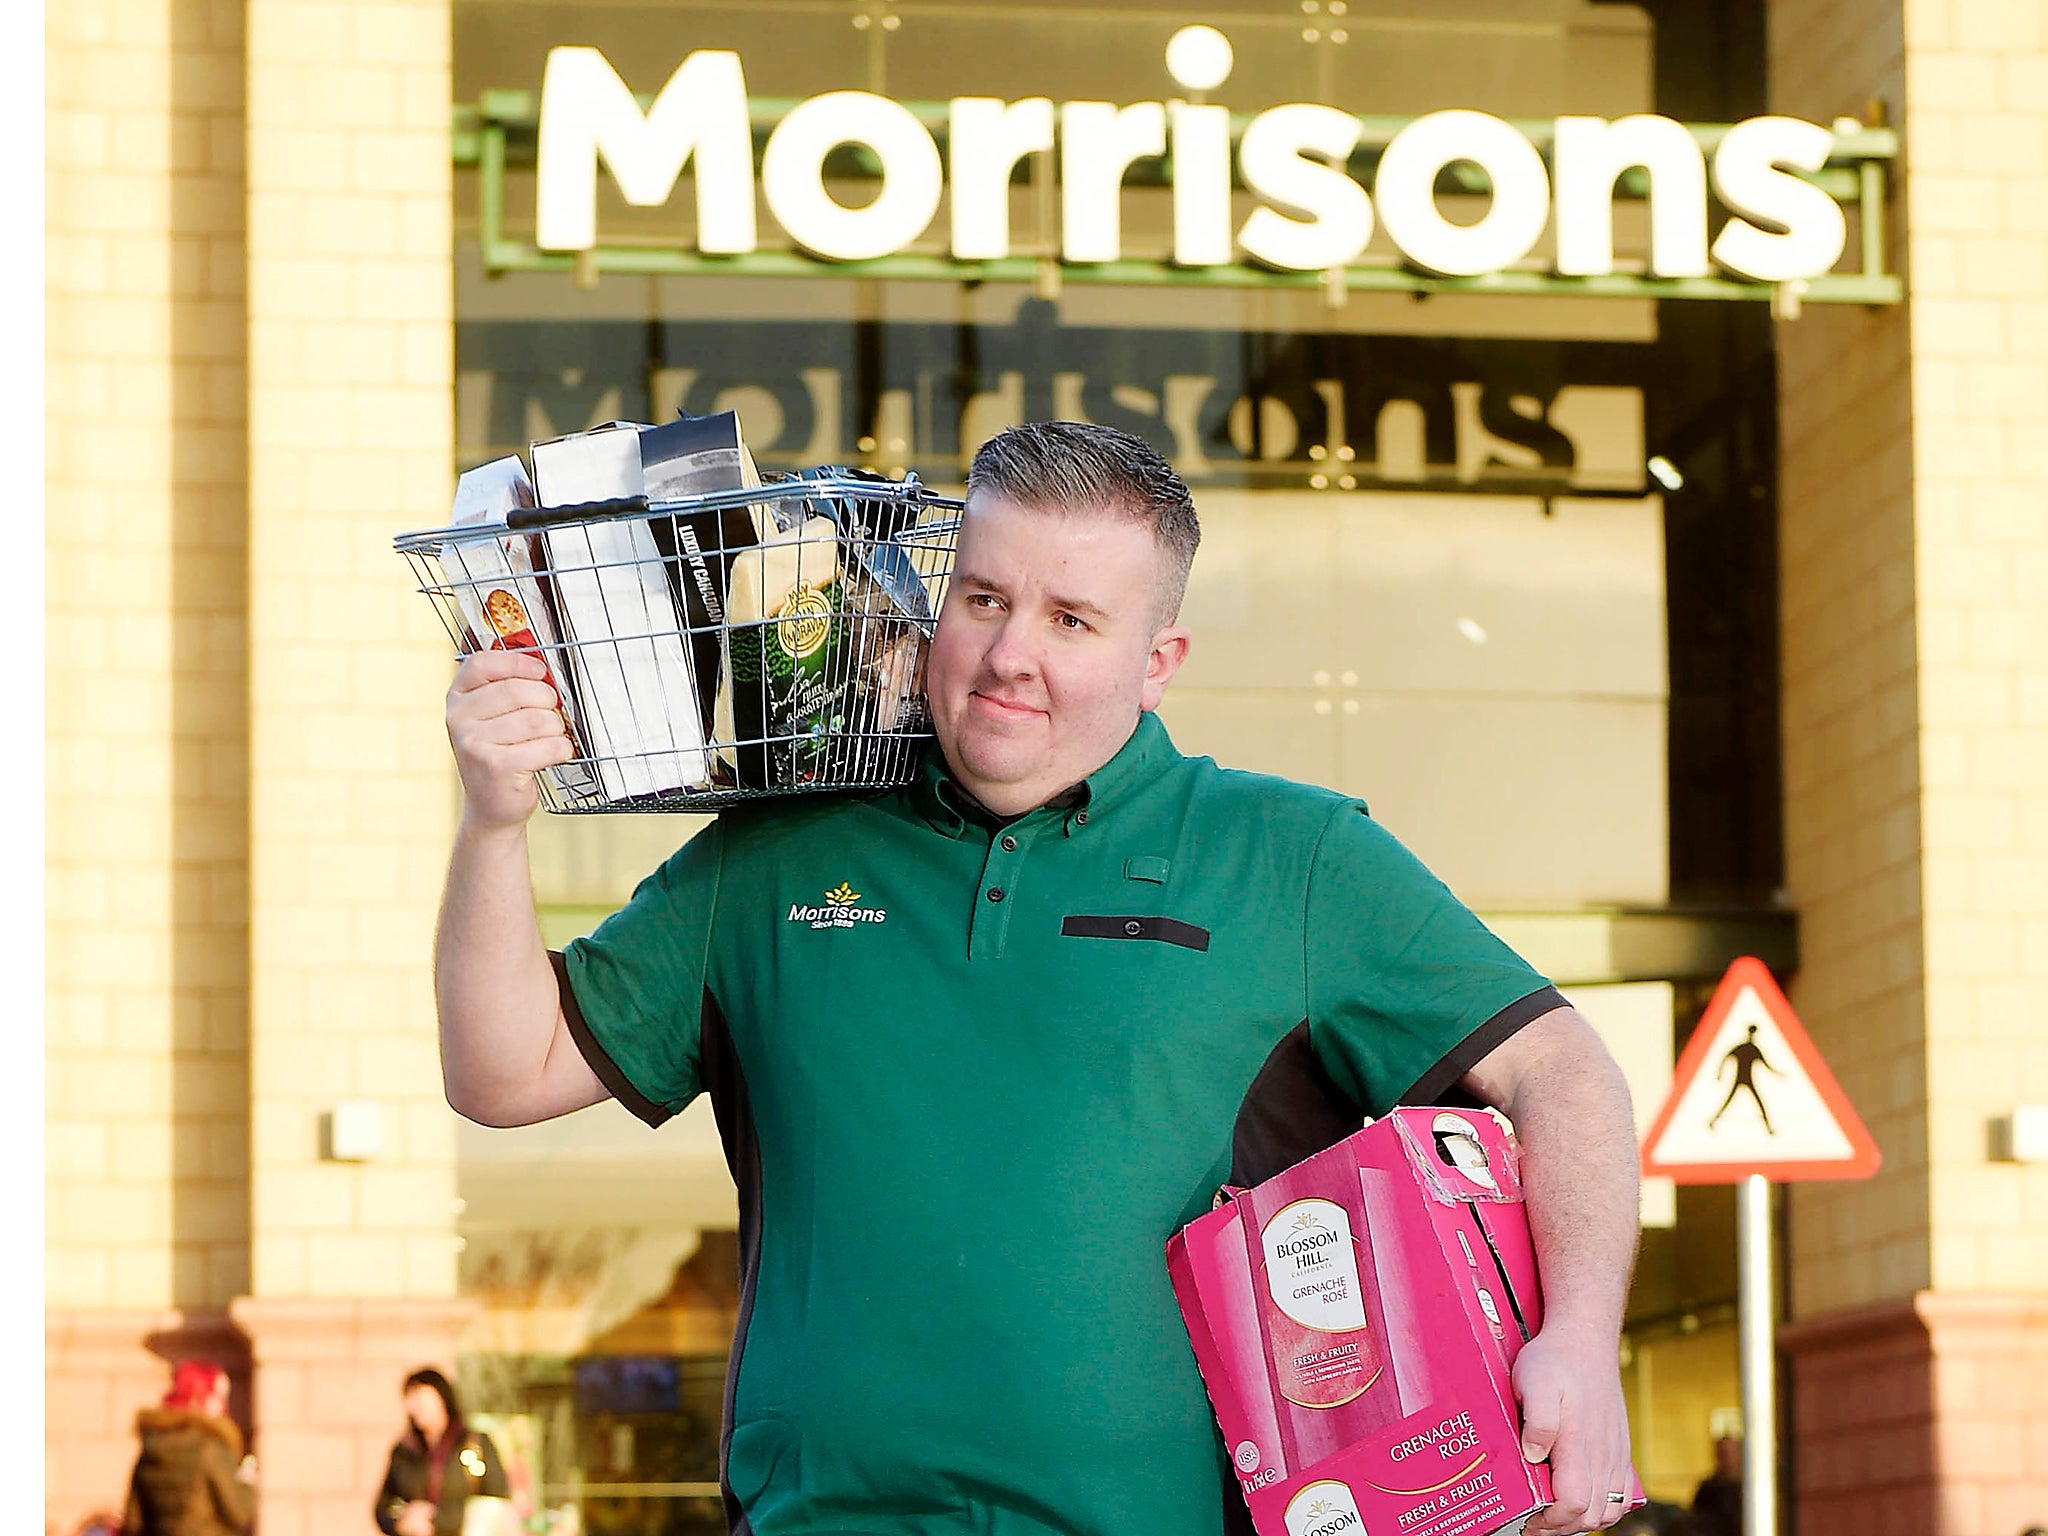 Morrisons has been trialling a convenience store brand